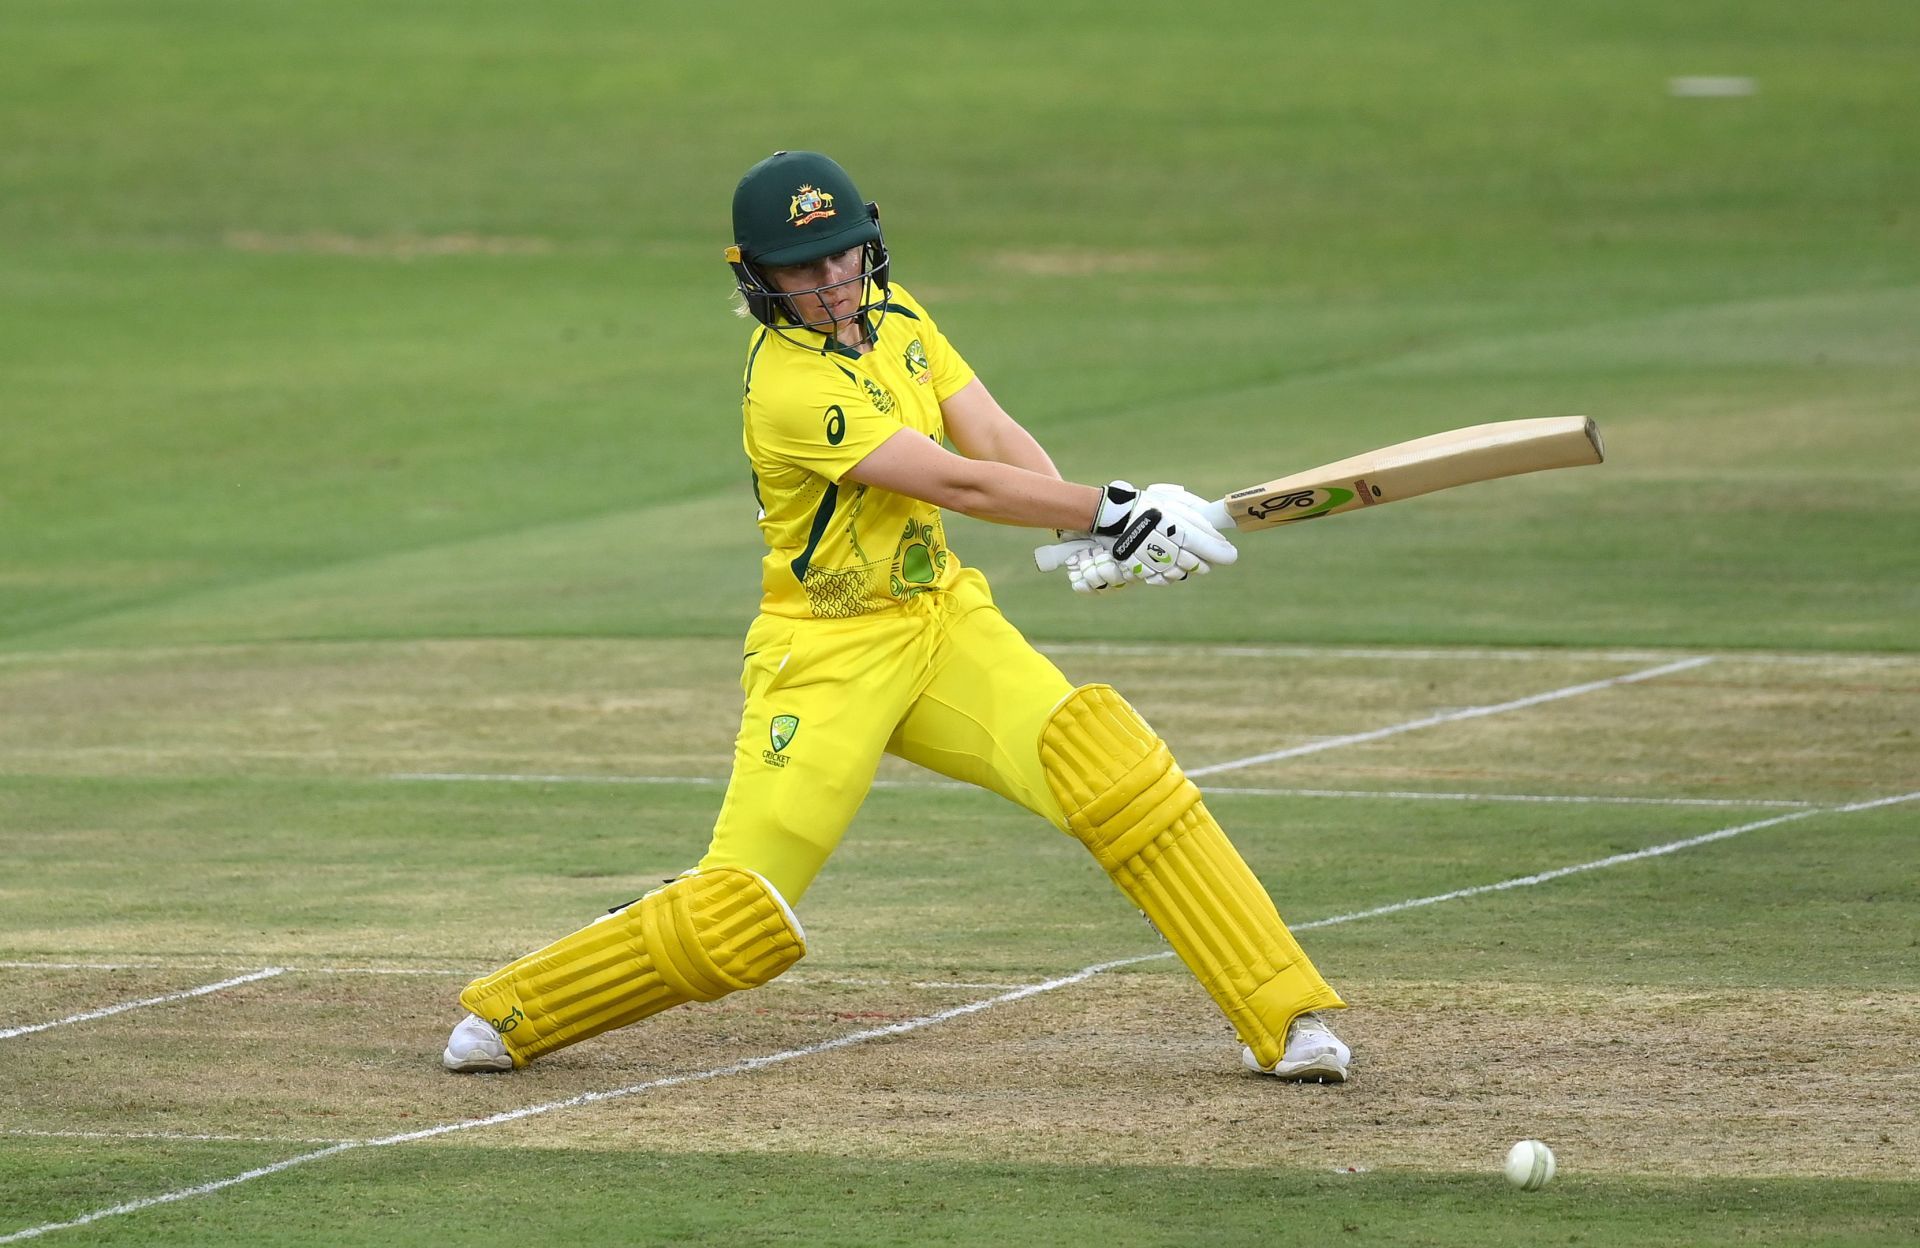 Alyssa Healy is known for her explosive batting at the top of the order.